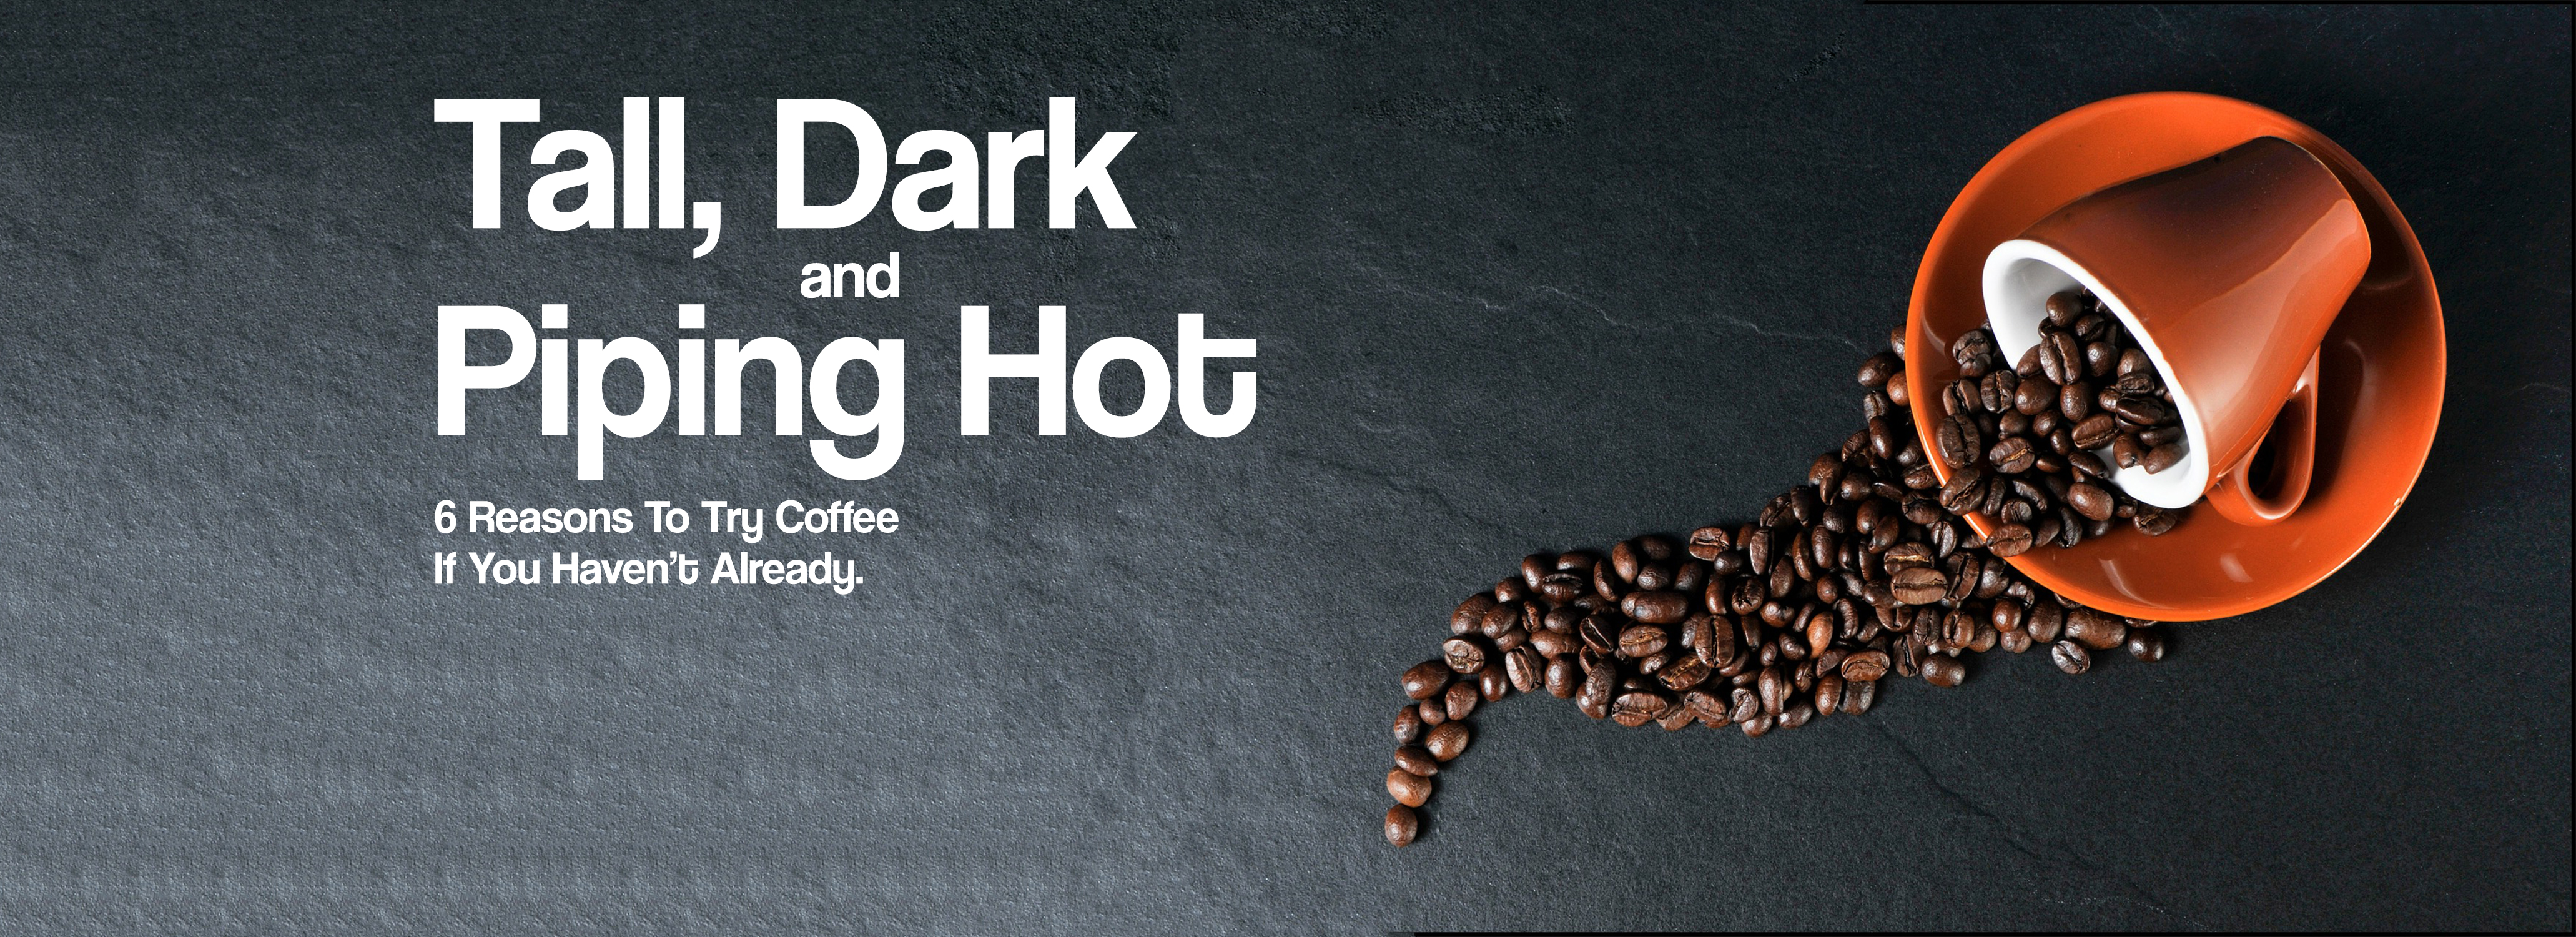 Tall, Dark, and Piping Hot: 6 Reasons To Try Coffee If You Haven’t Already.